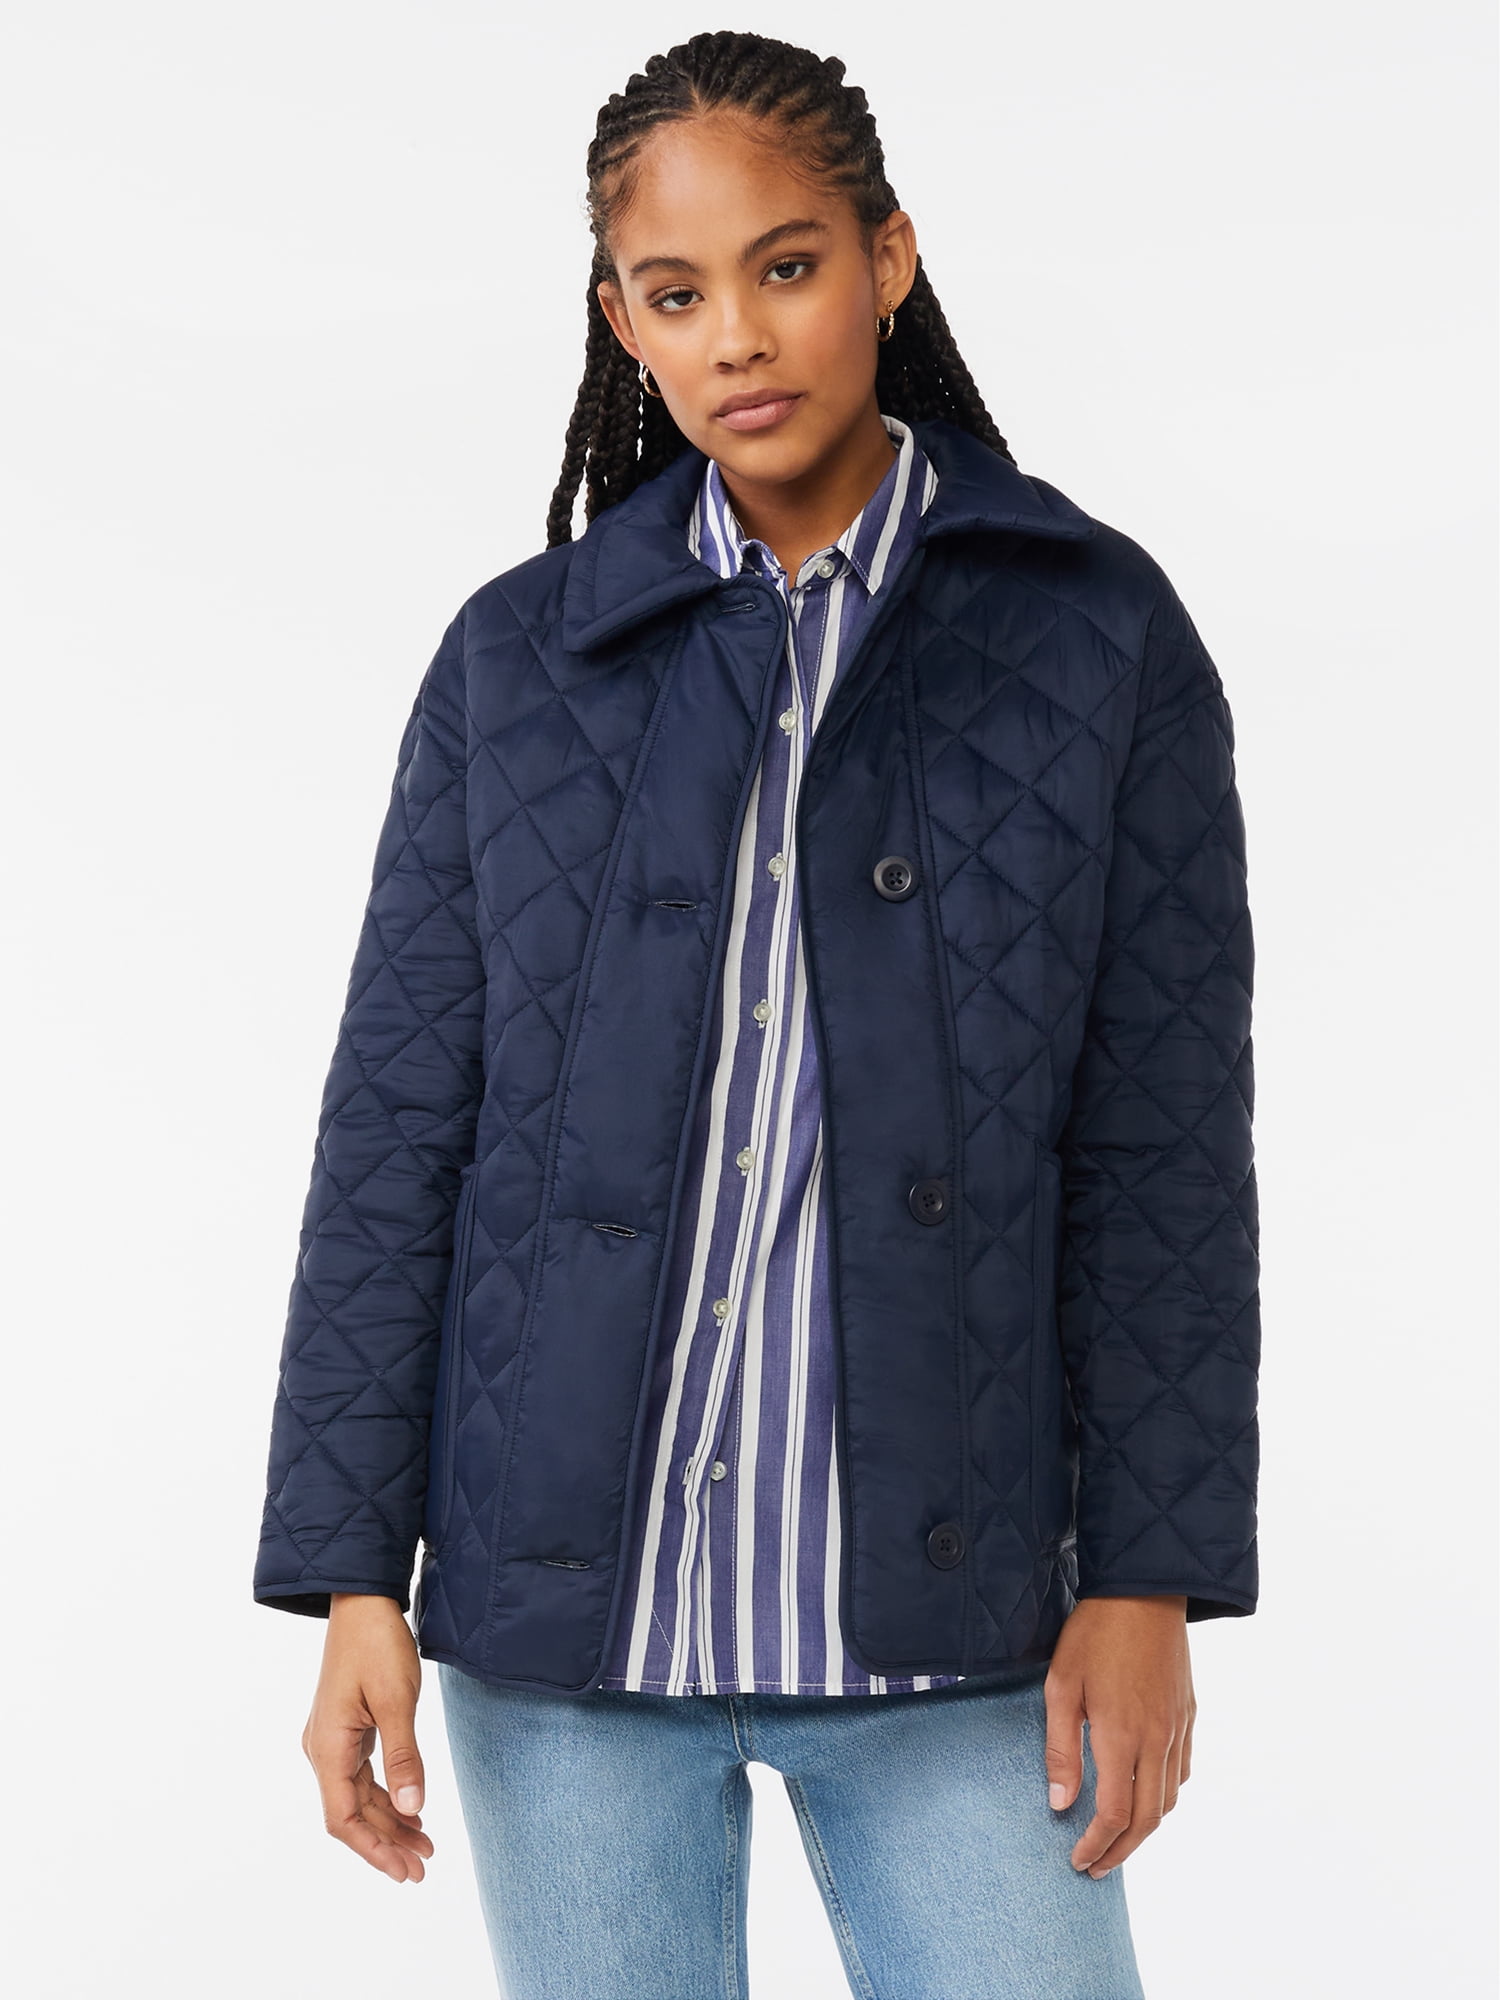 Free Assembly Women's Quilted Shell Jacket 